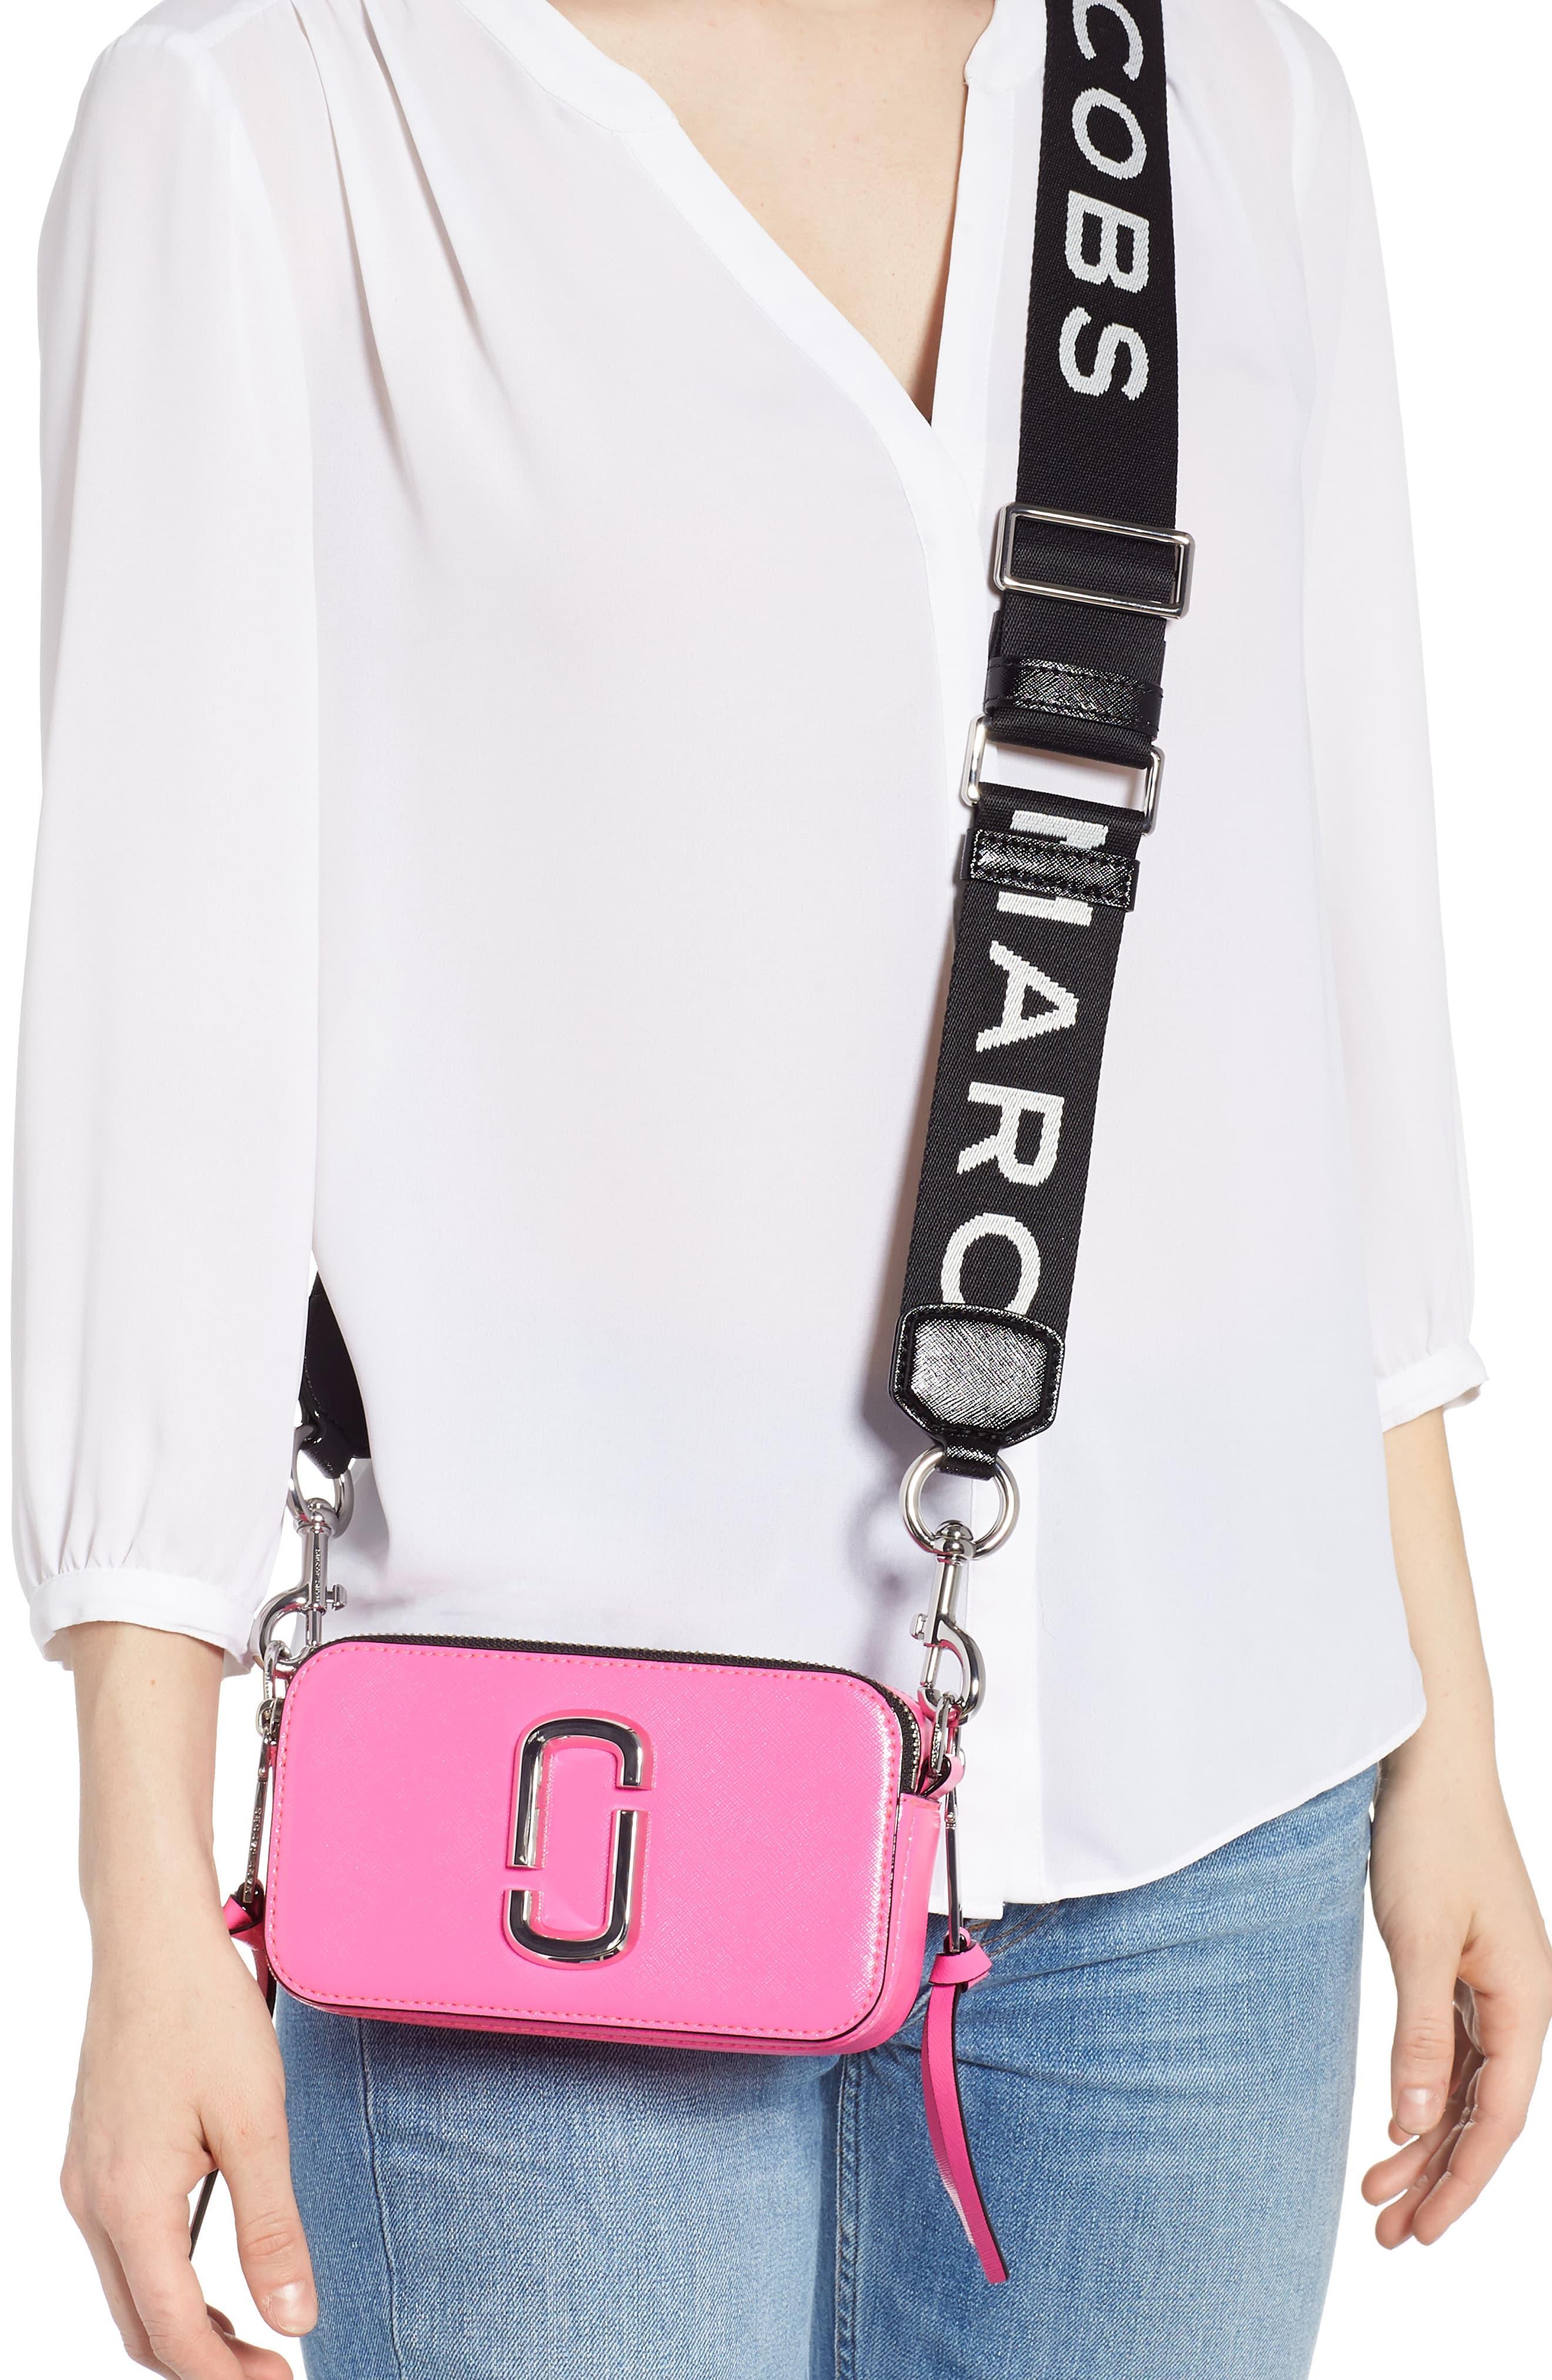 Marc Jacobs Snapshot Crossbody Bag in Bright Pink (Pink) - Lyst